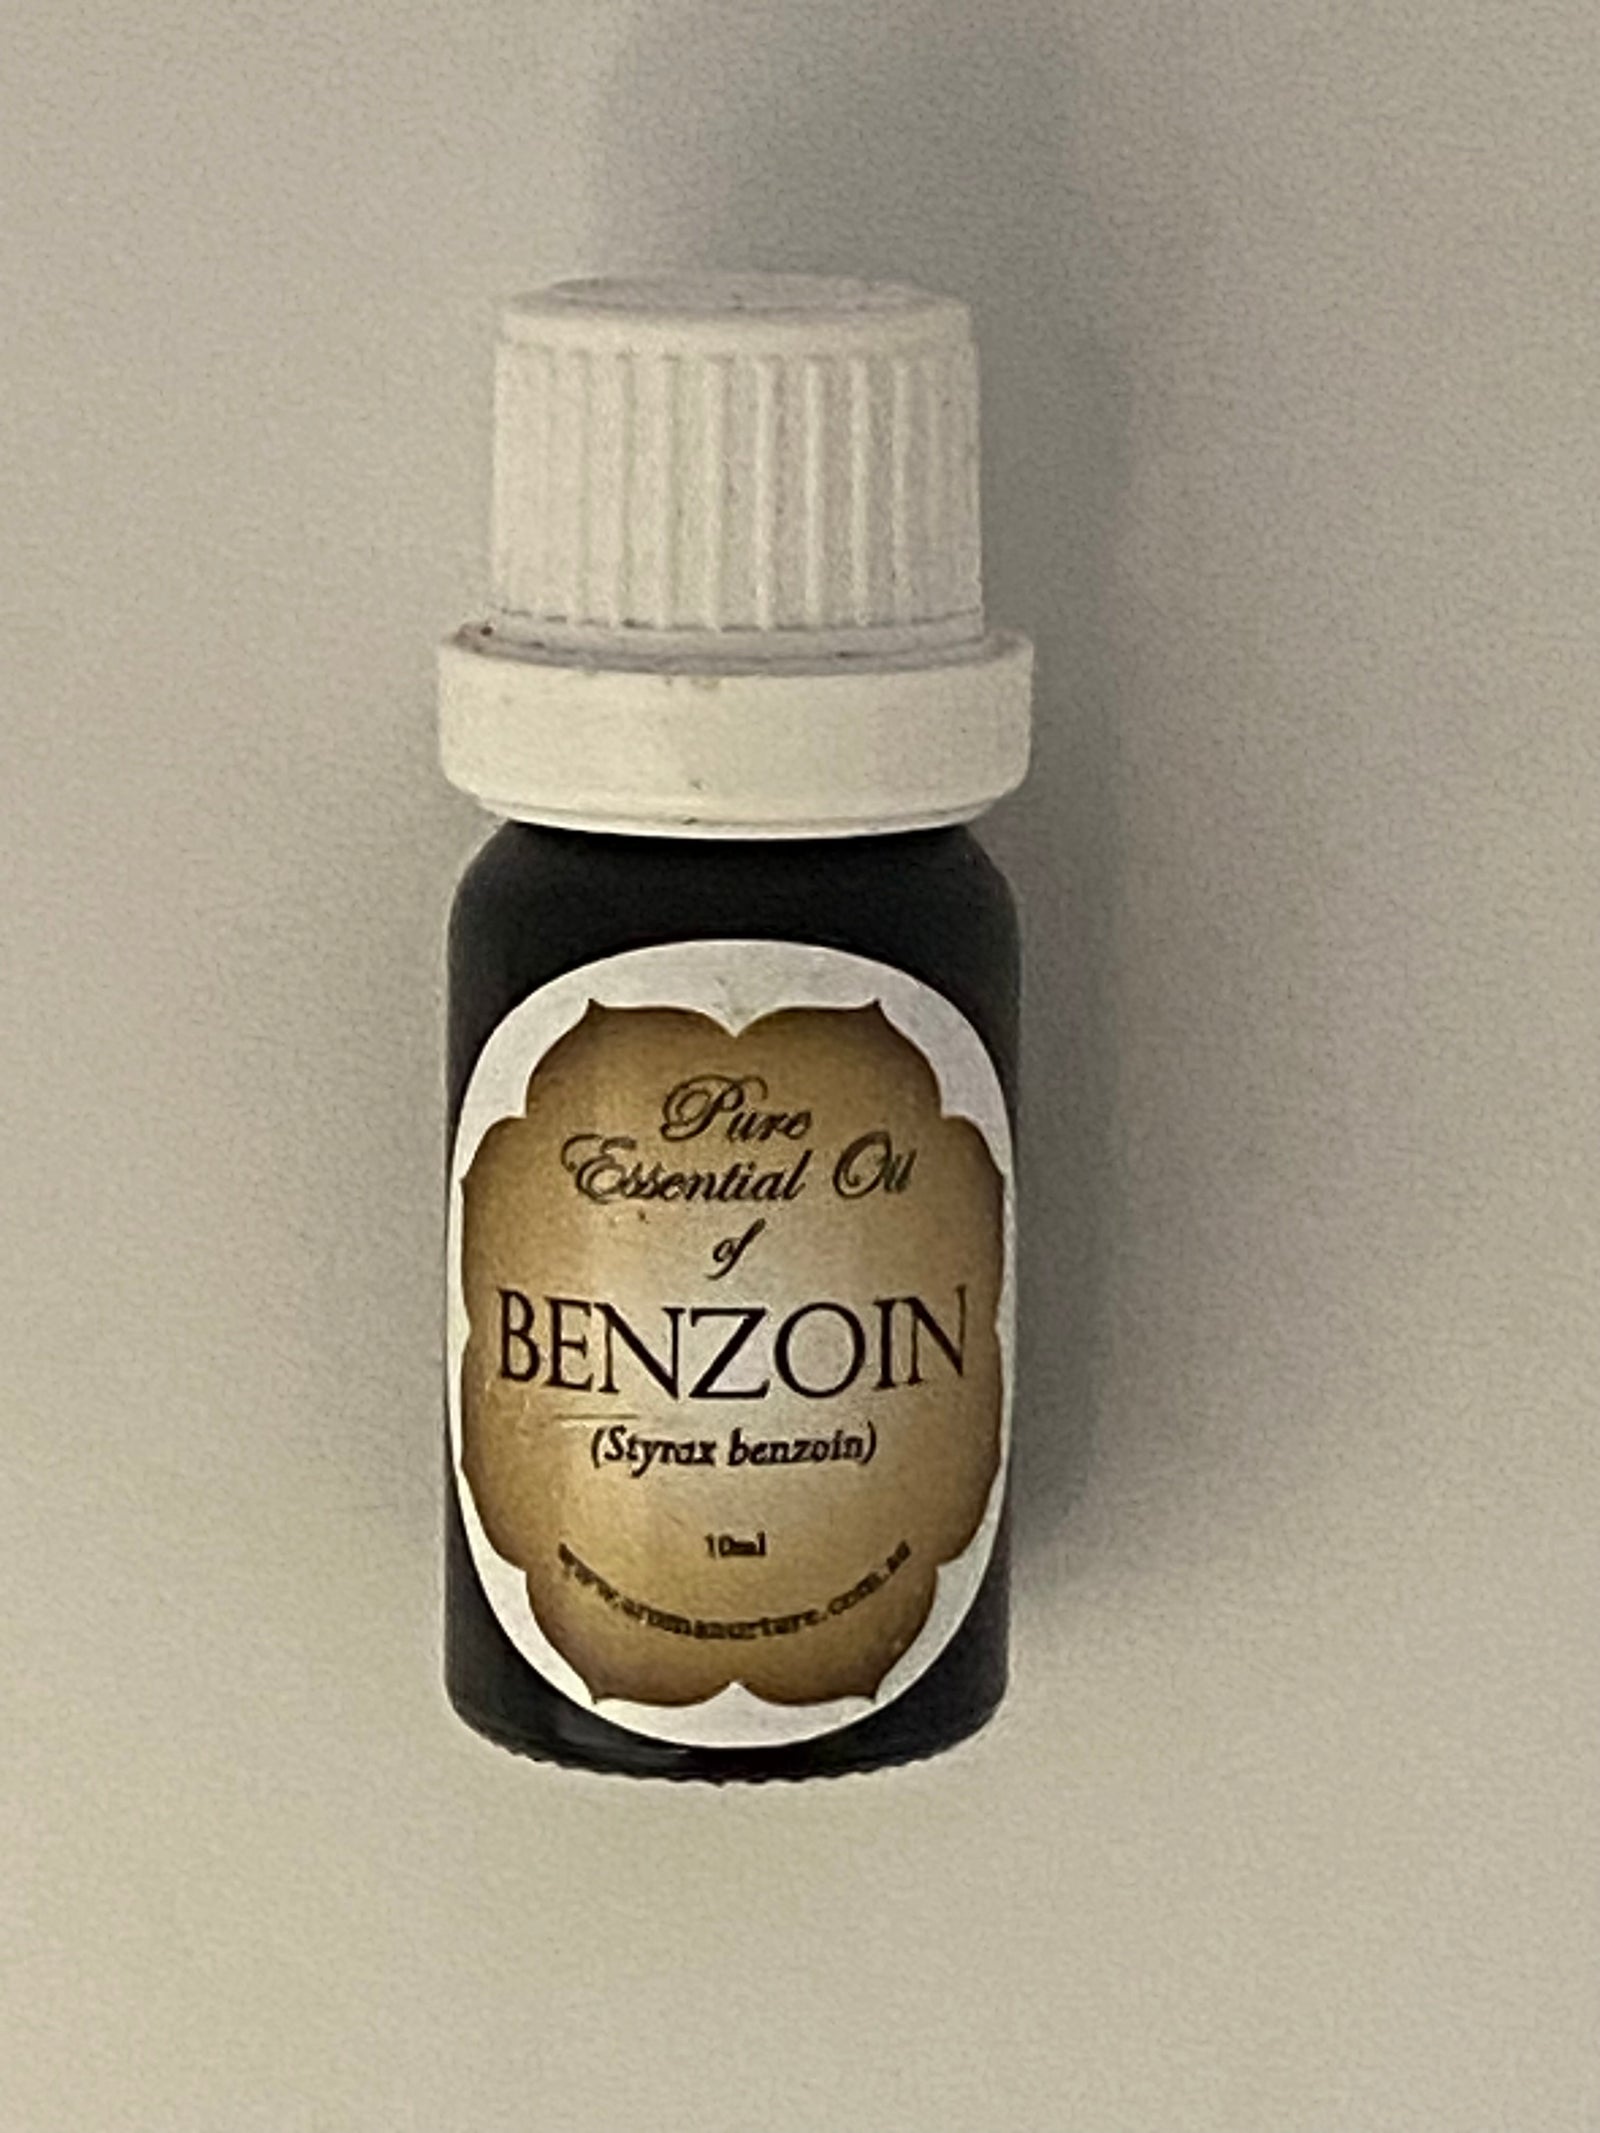 Pure essential oil of Benzoin 10mls.(Styrax benzoin)